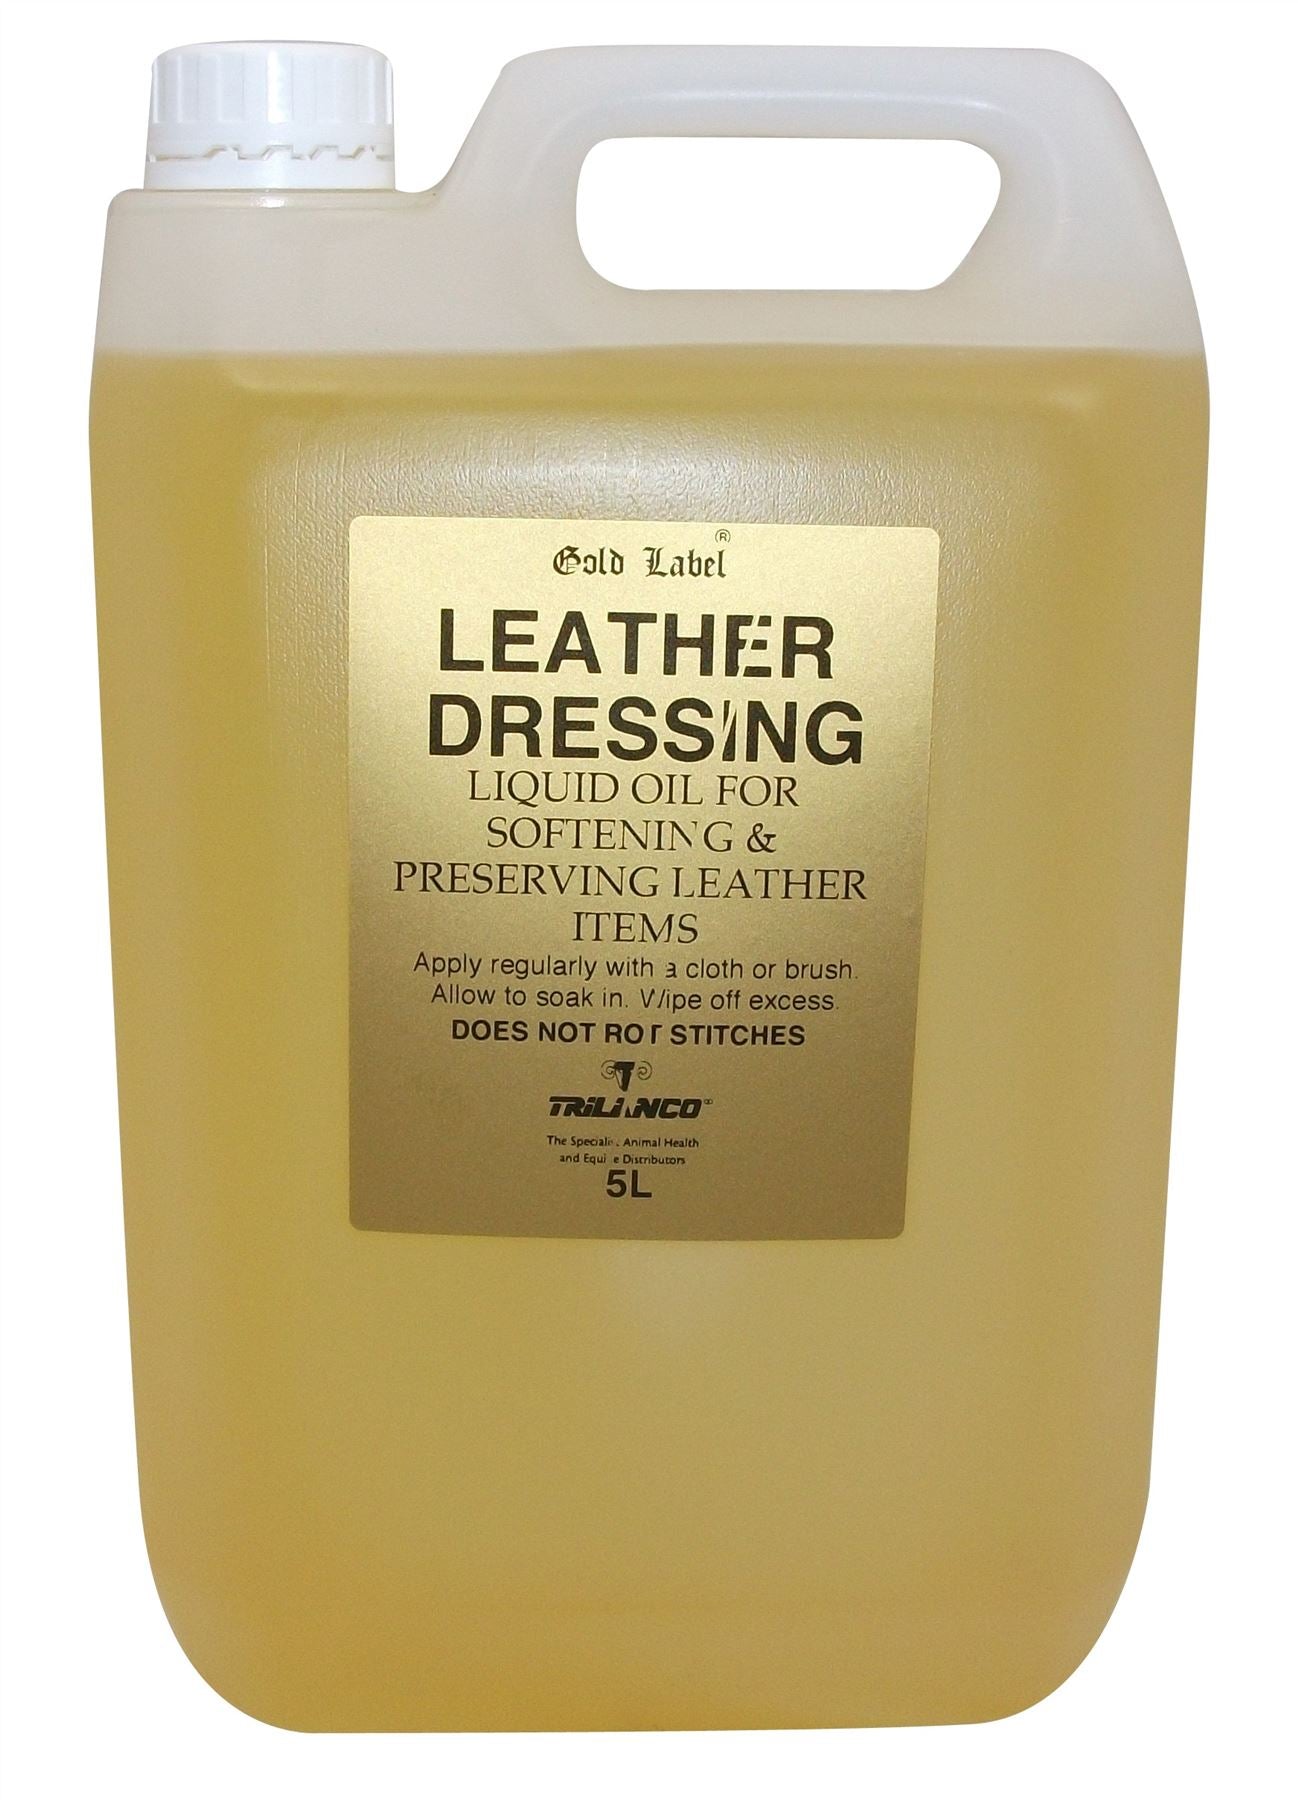 Gold Label Leather Dressing - Just Horse Riders